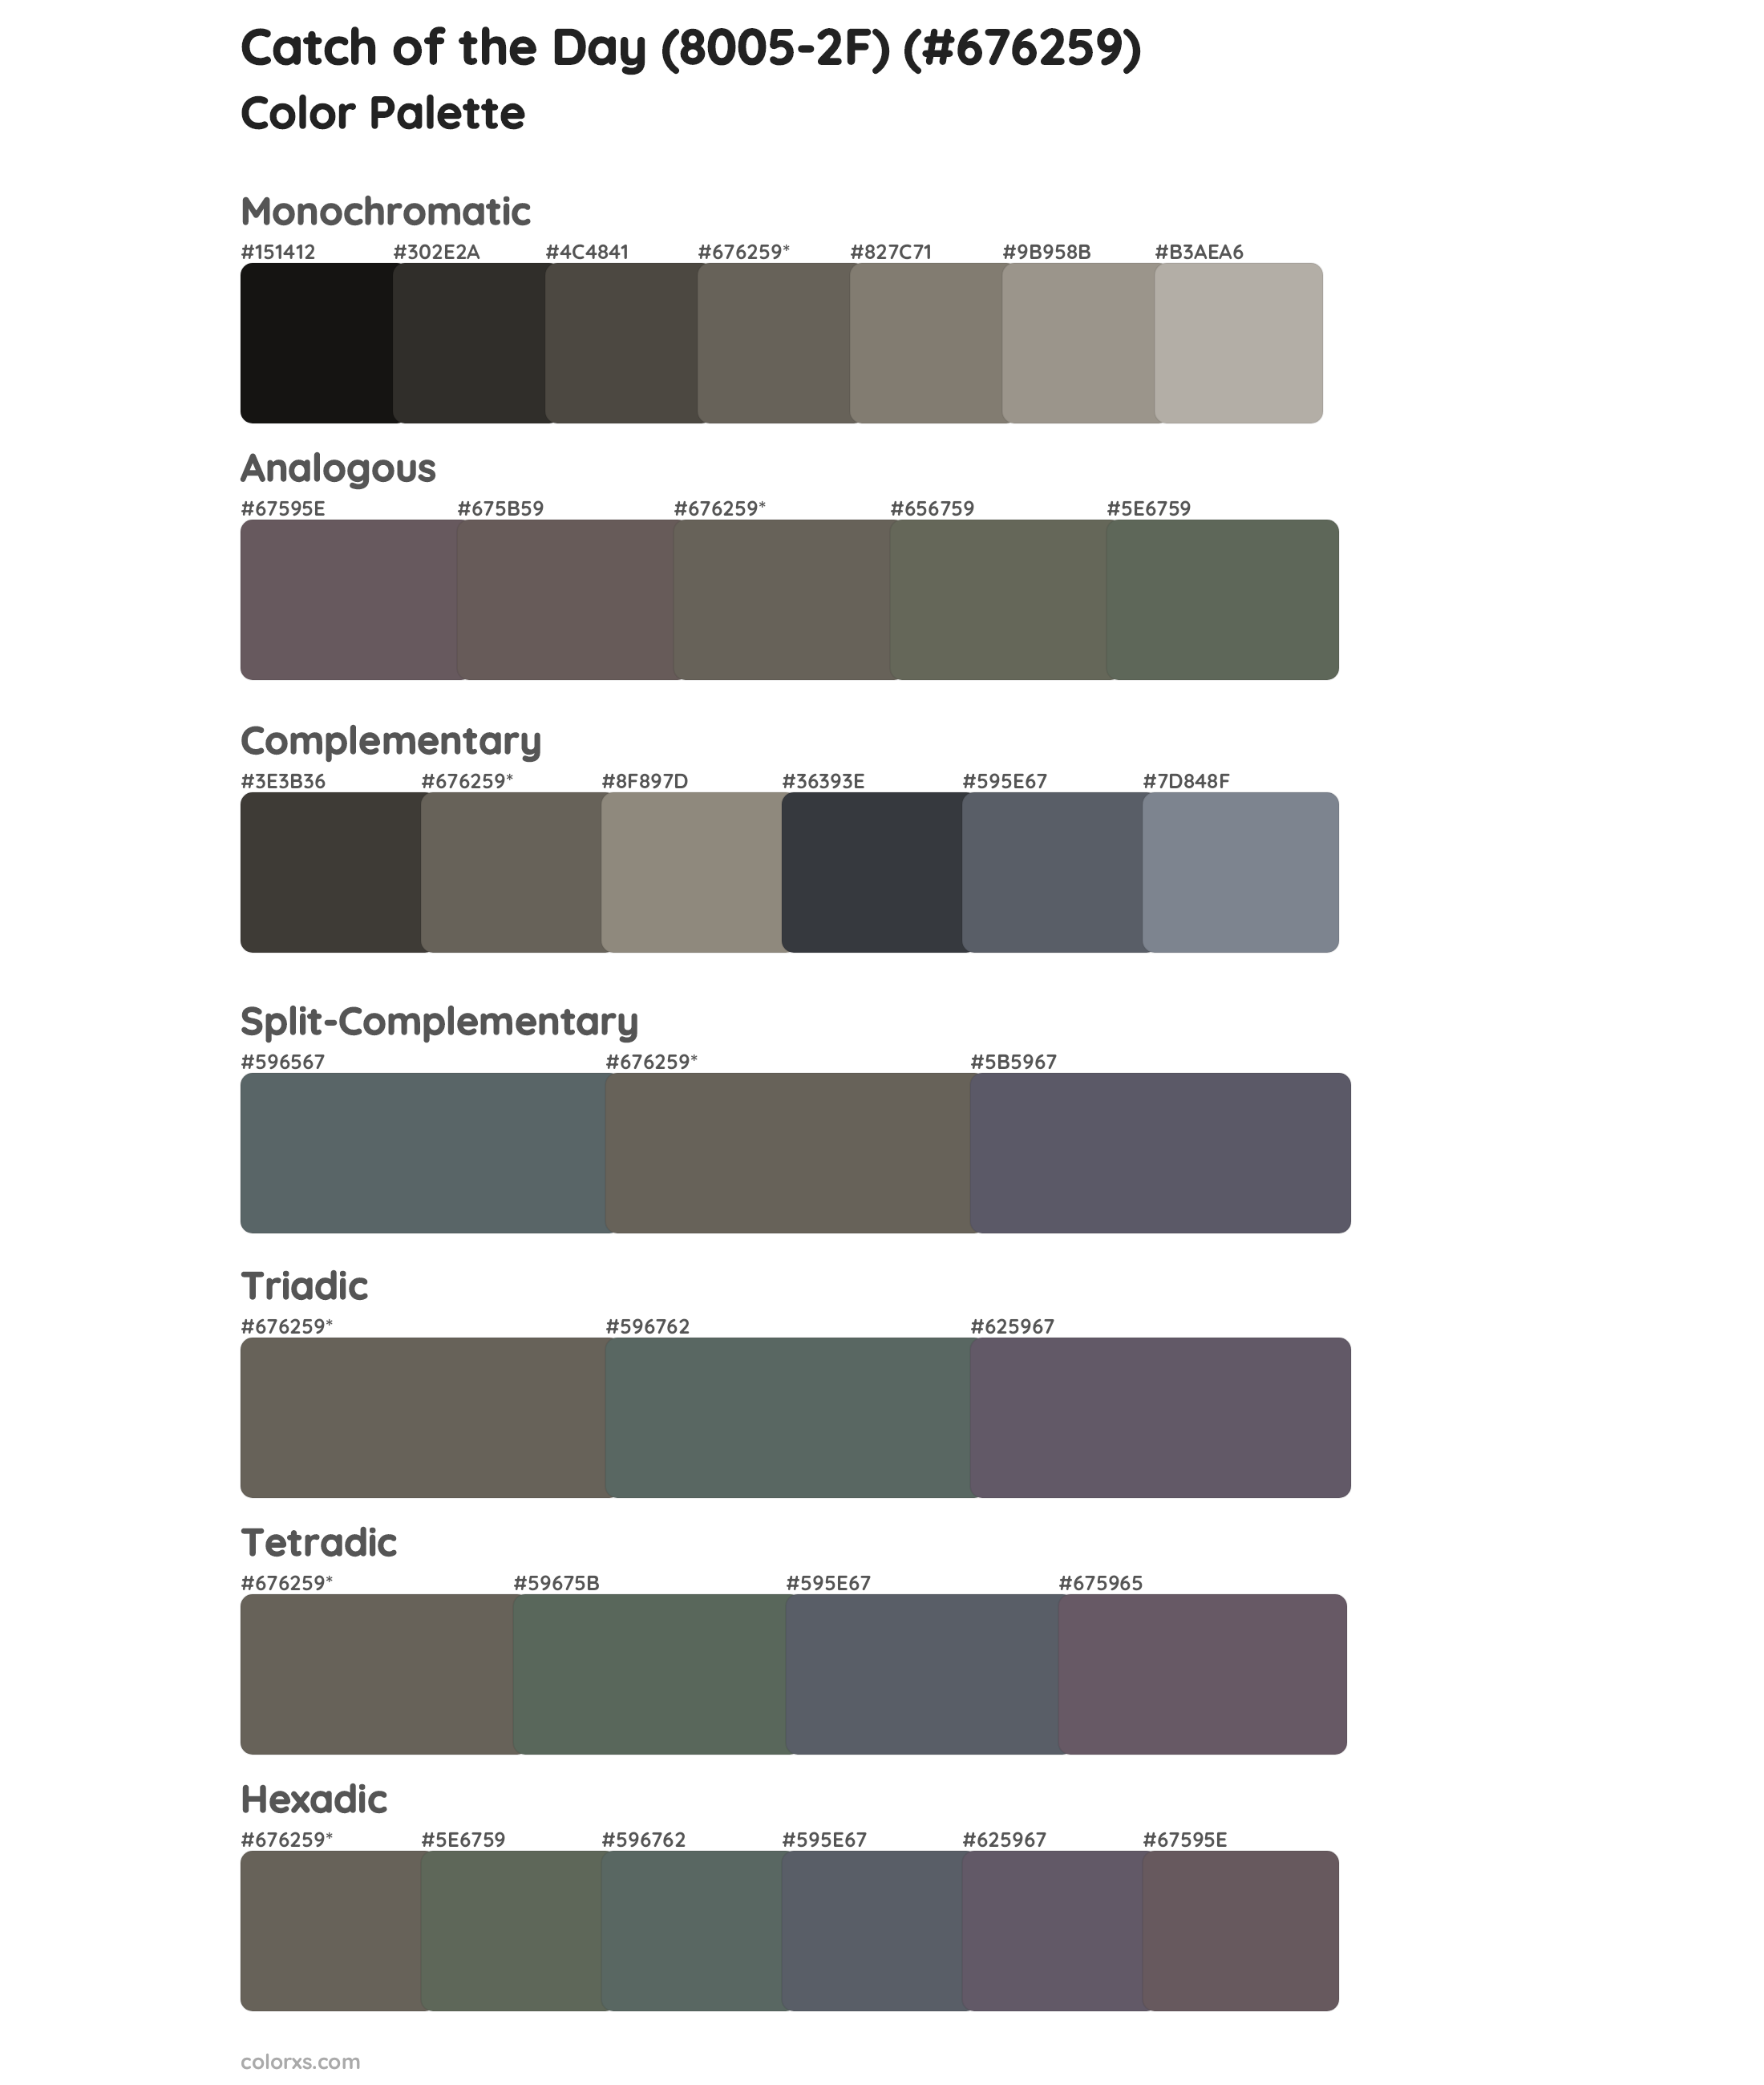 Catch of the Day (8005-2F) Color Scheme Palettes